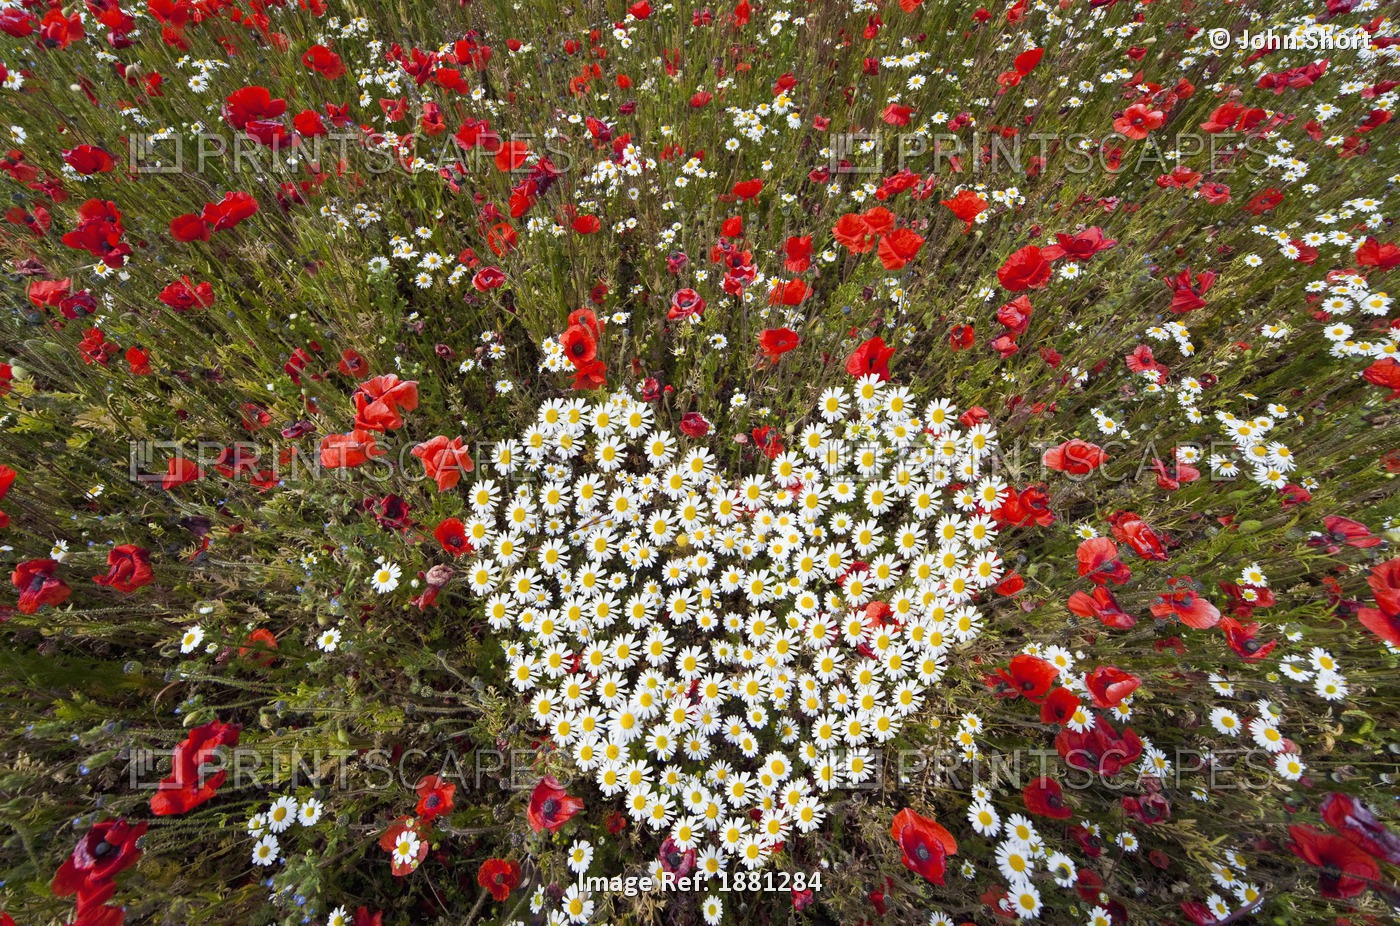 Daisies In The Shape Of A Heart; Northumberland, England